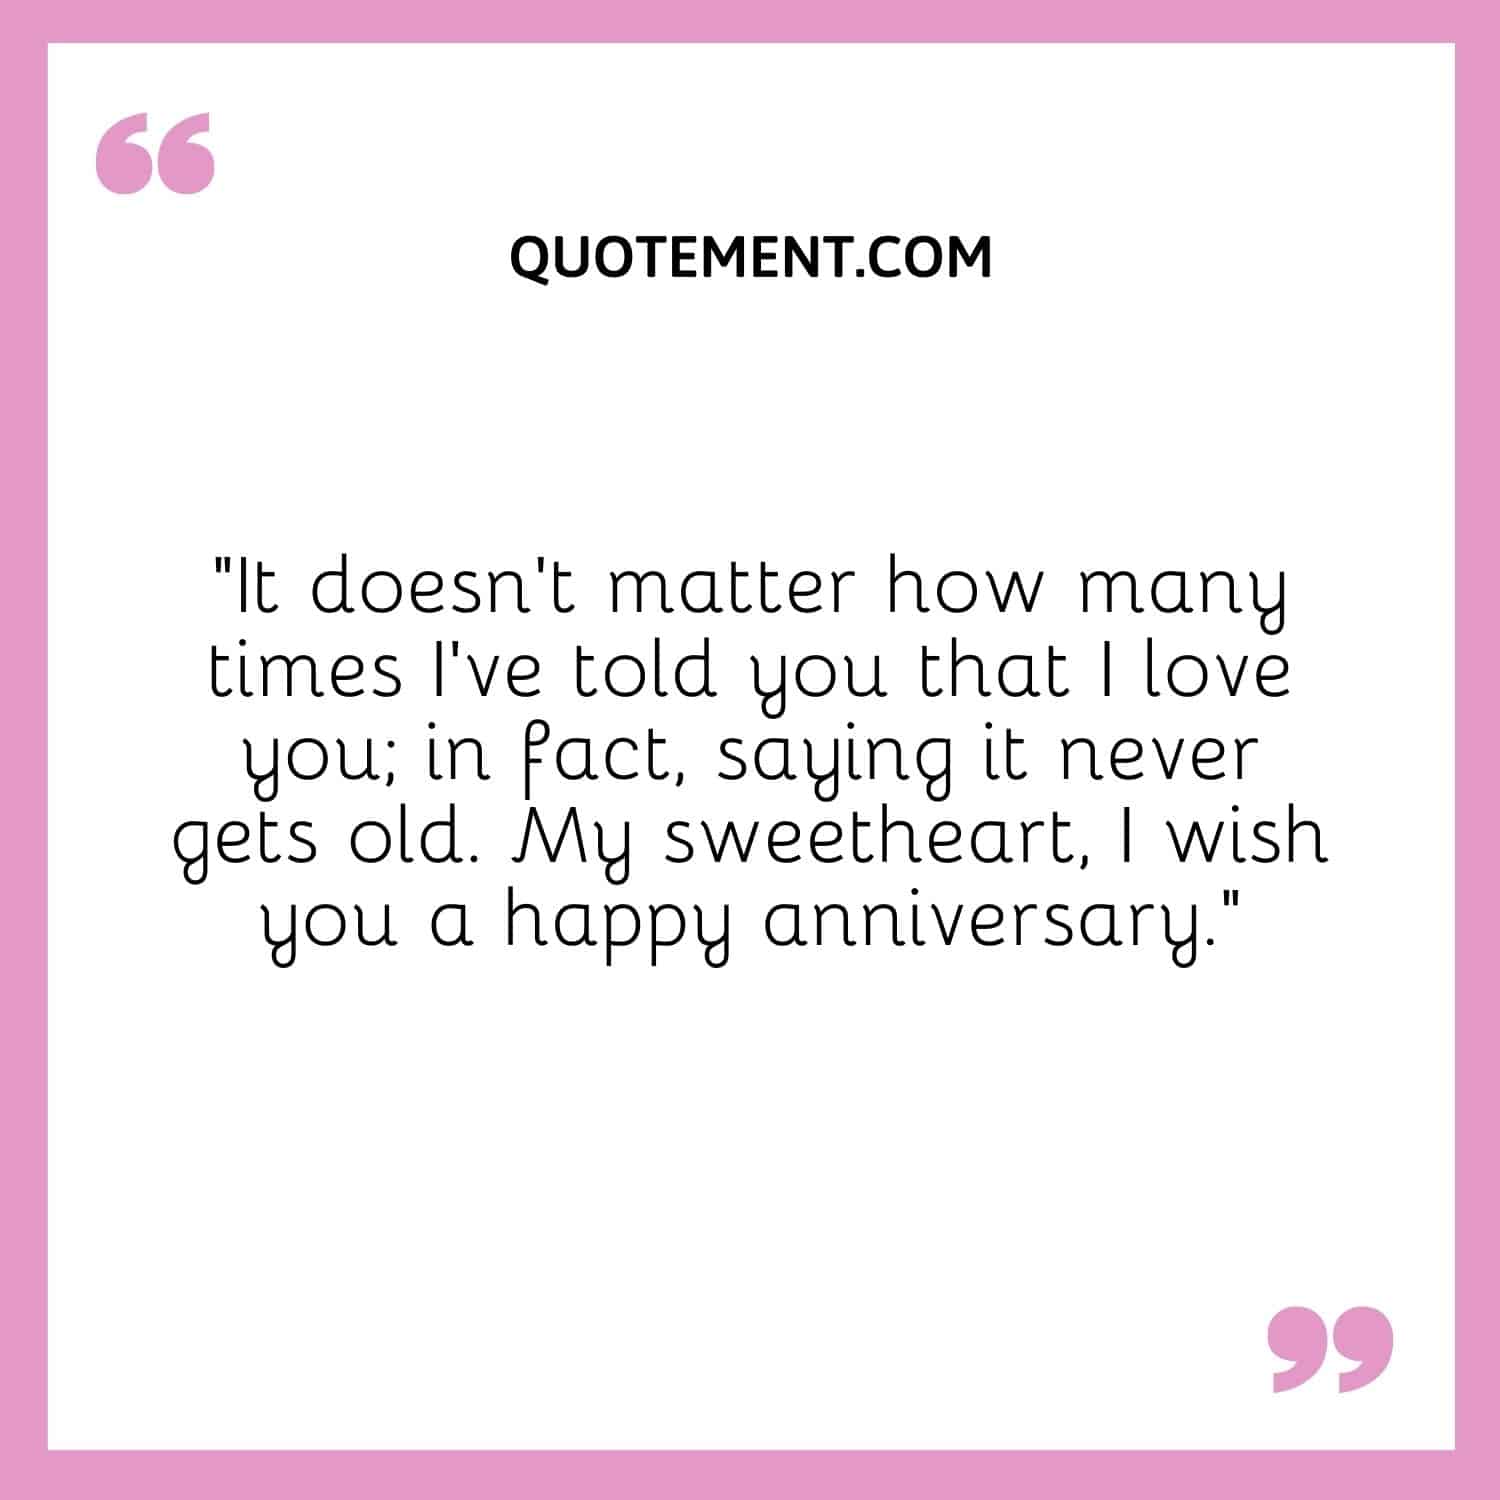 “It doesn’t matter how many times I’ve told you that I love you; in fact, saying it never gets old. My sweetheart, I wish you a happy anniversary.”